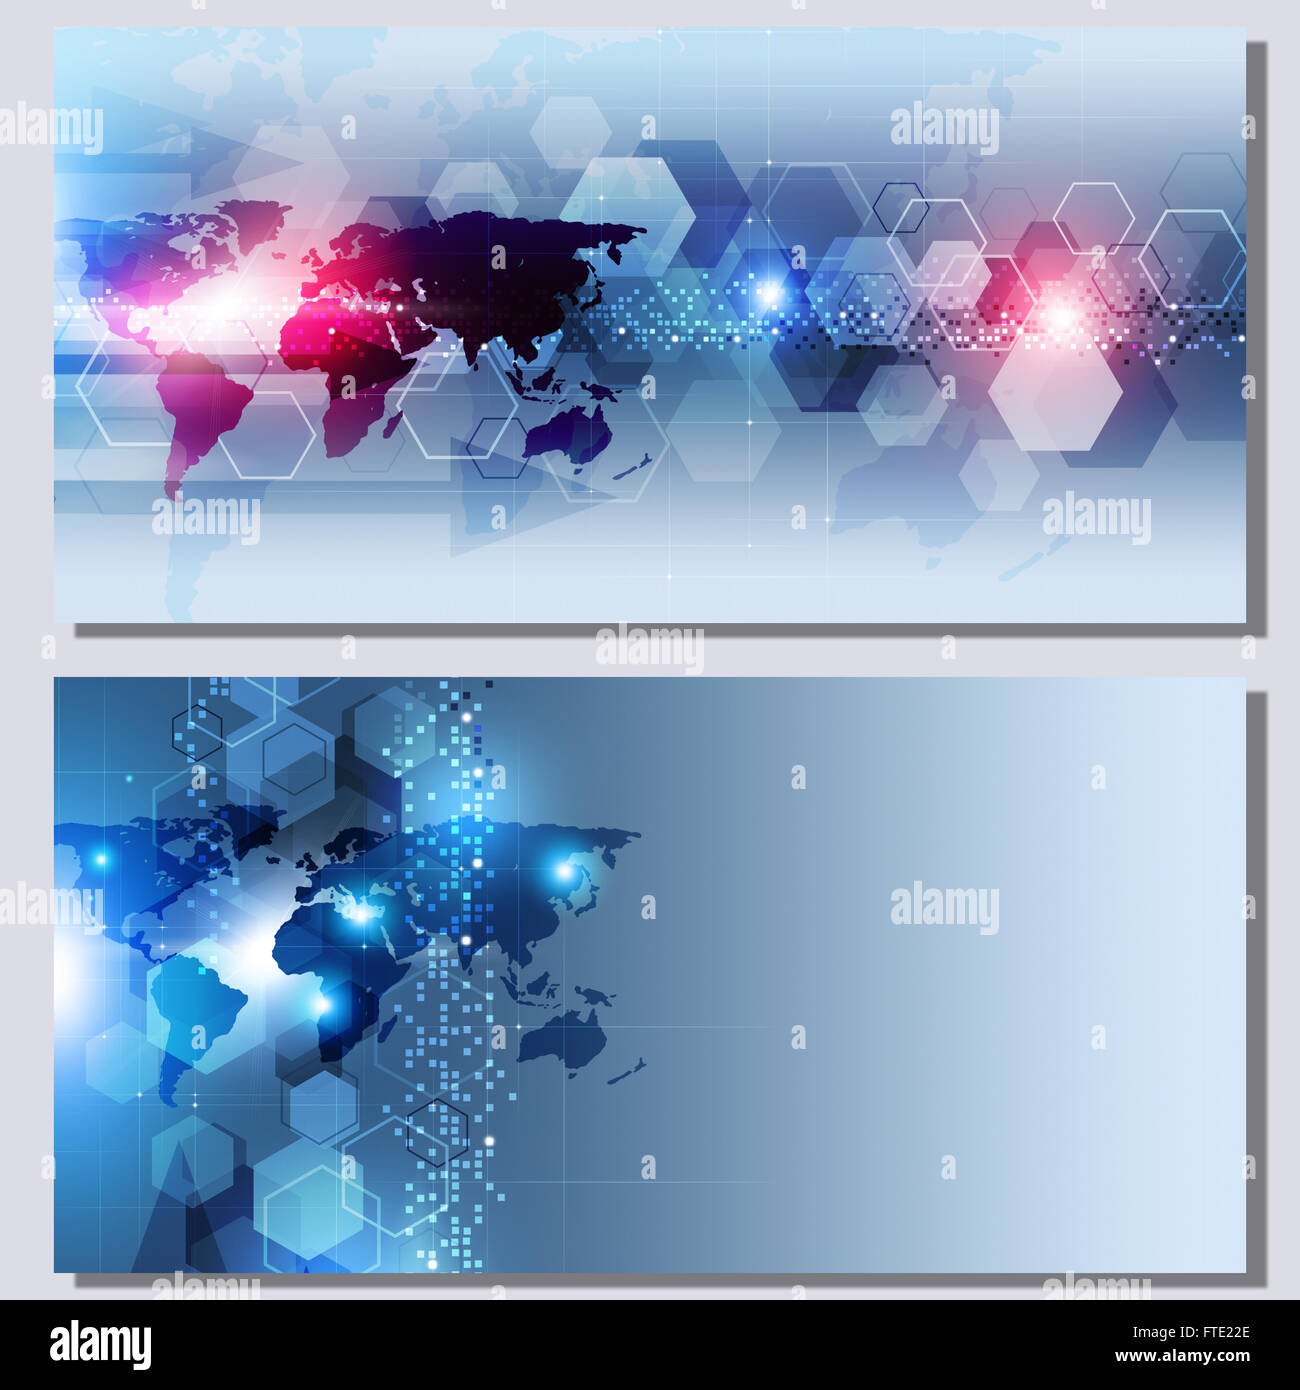 abstract business and technology concept two banners Stock Photo